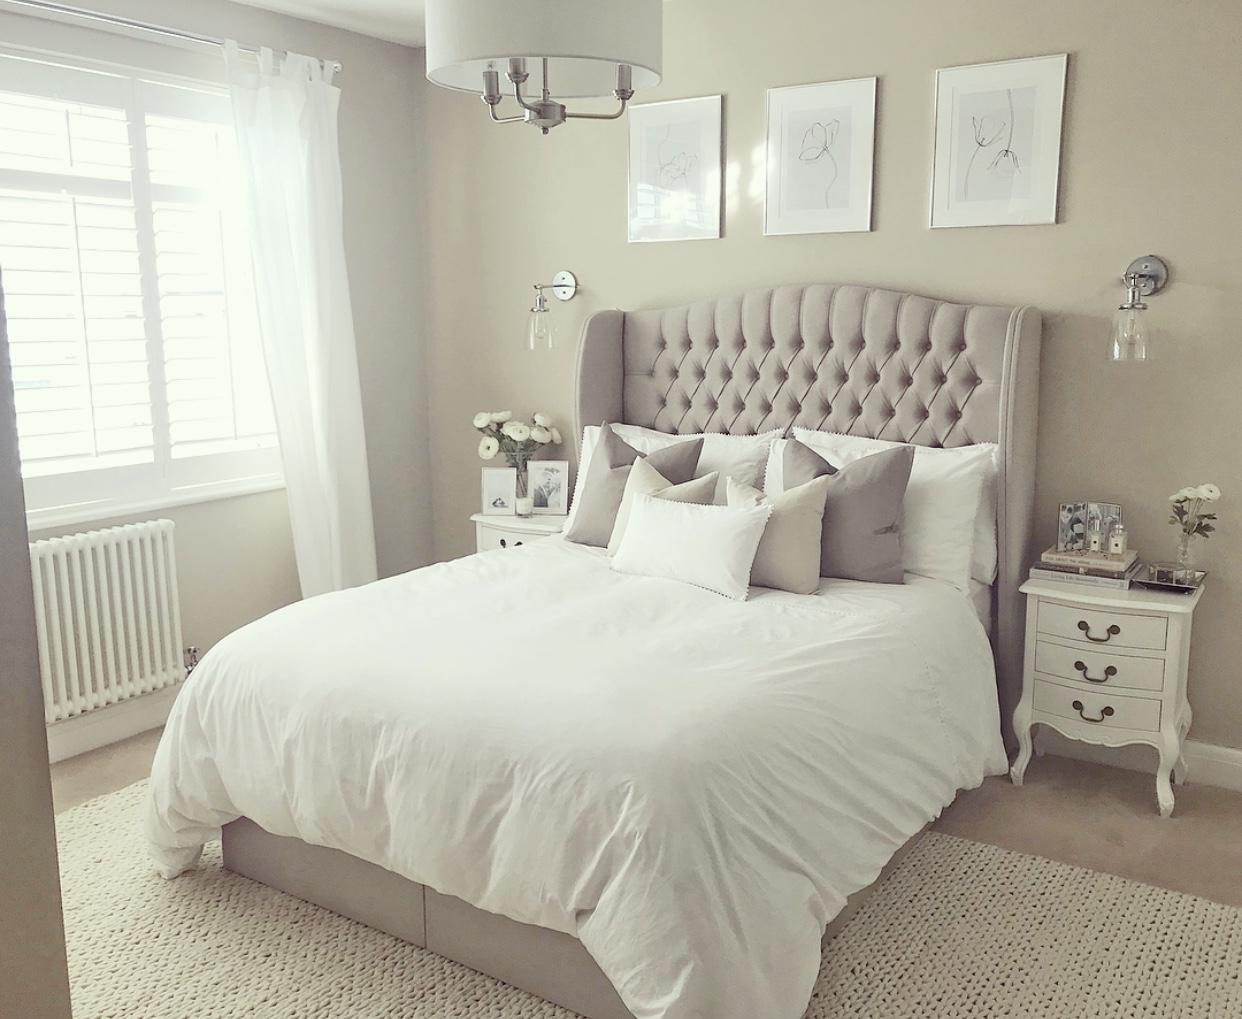 5 Tricks to Make Your Bedroom Look Expensive & Luxurious – The Home ...